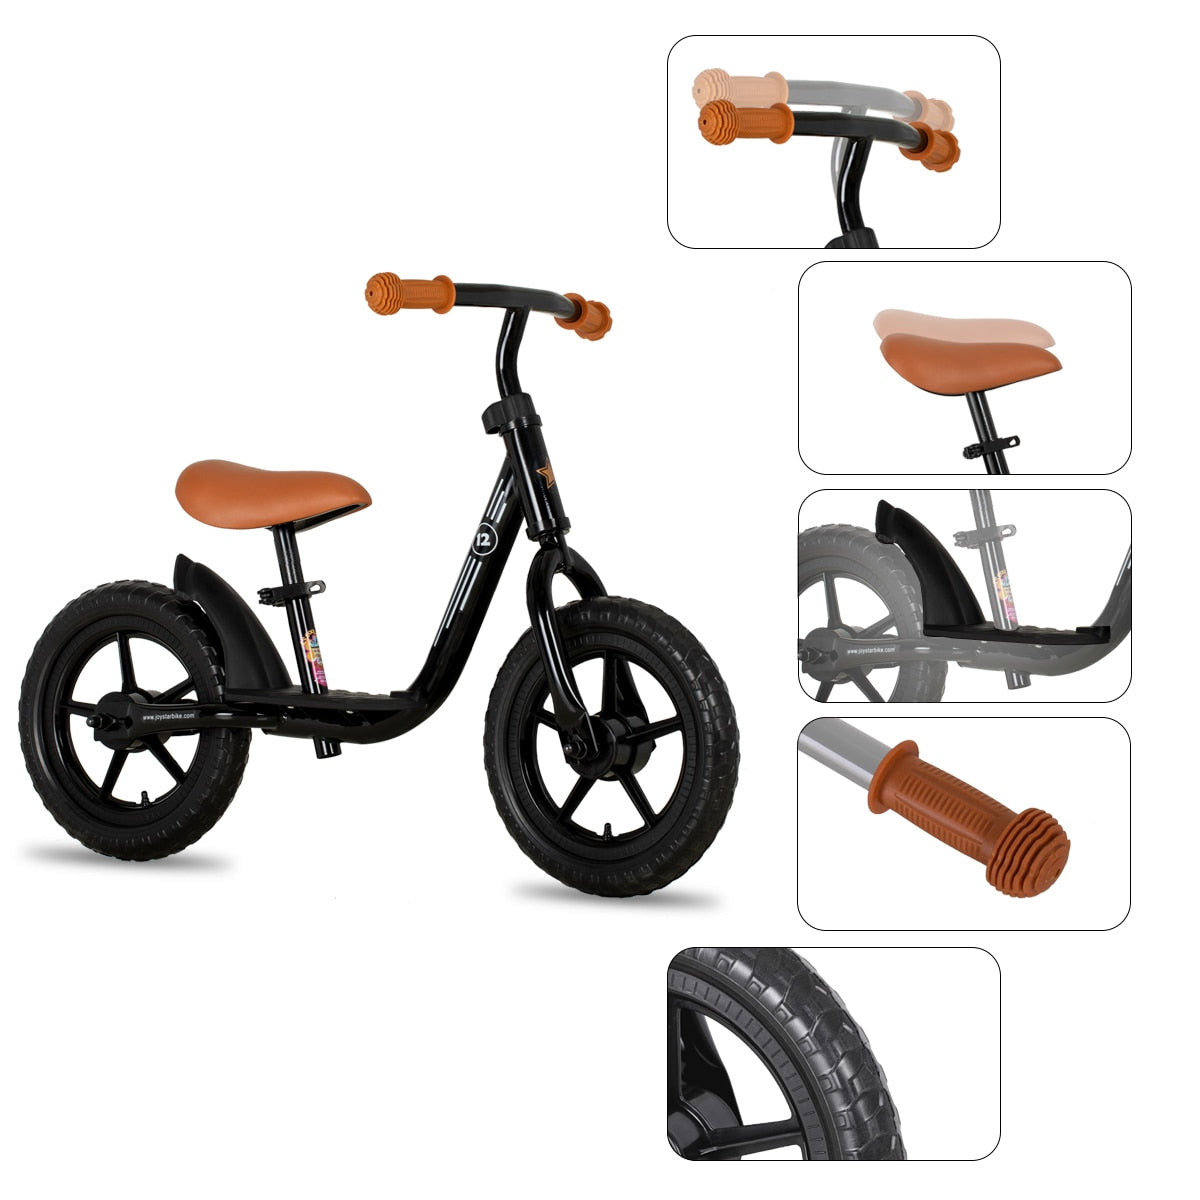 10 & 12 Inch Riding Bicycle 1-3 Years